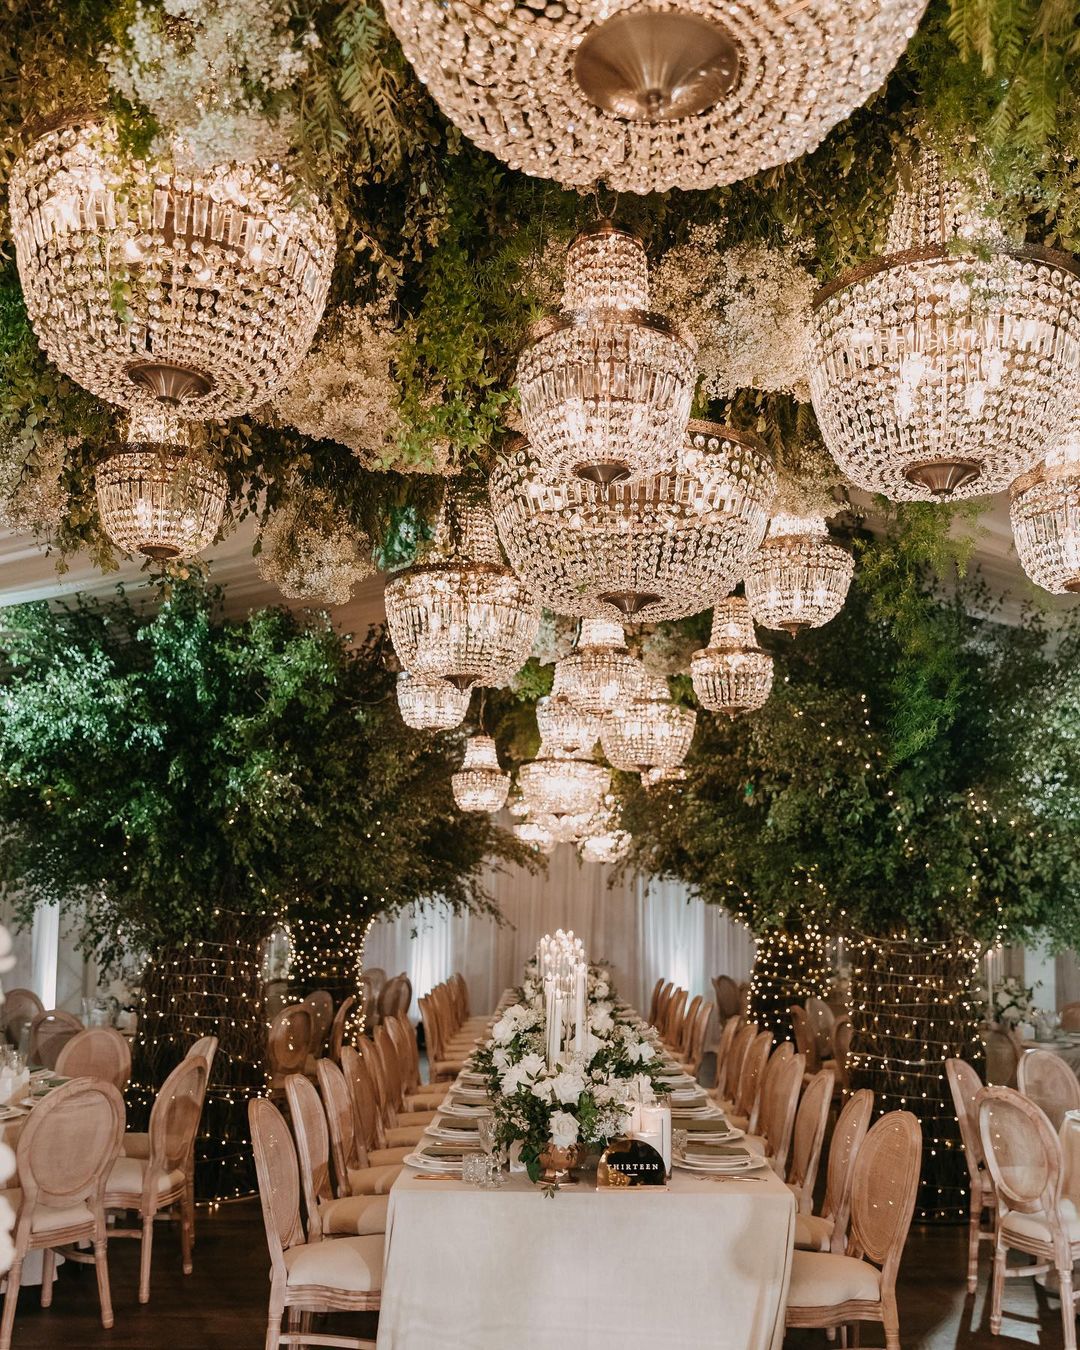 A reception styled by Diane Khoury, a powerhouse of the wedding industry.